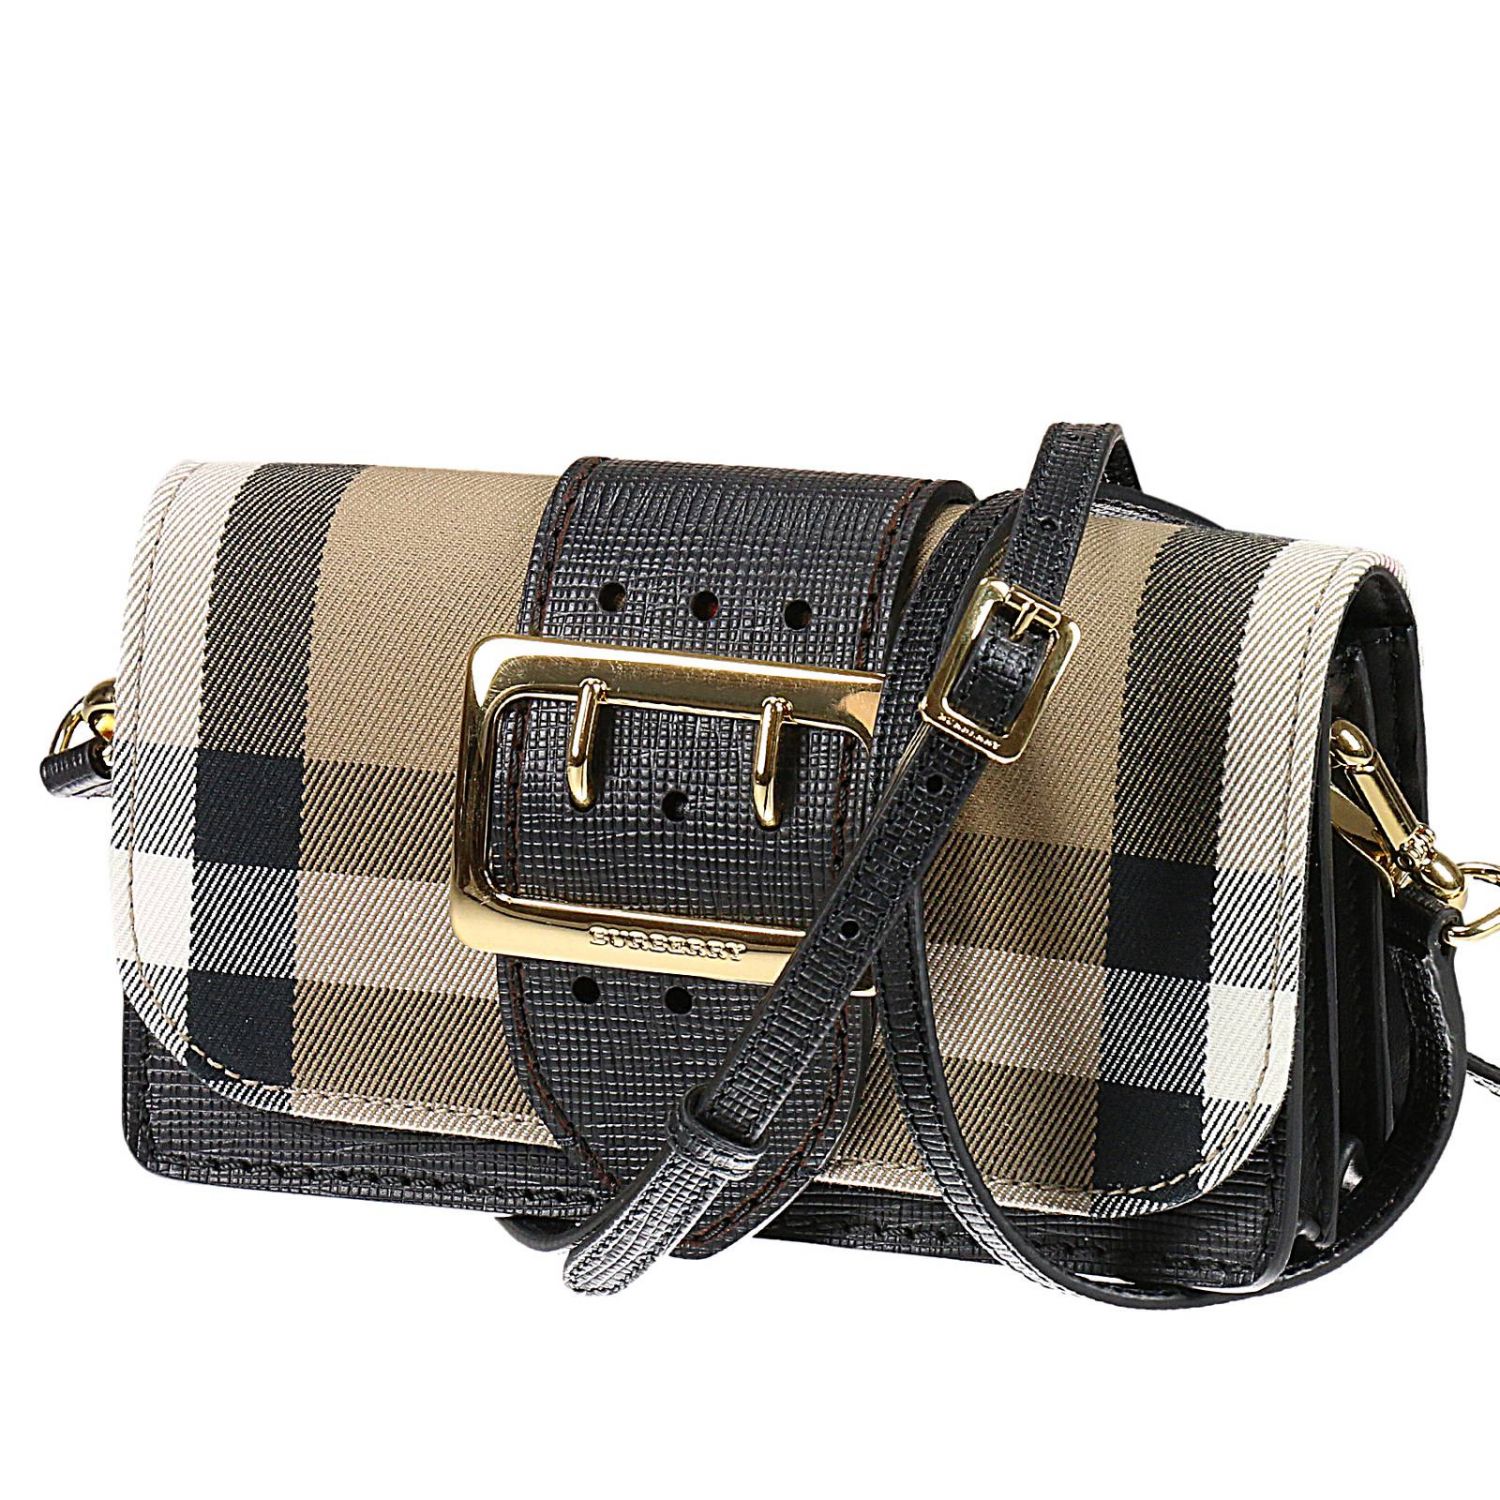 Burberry Handbags Outlet